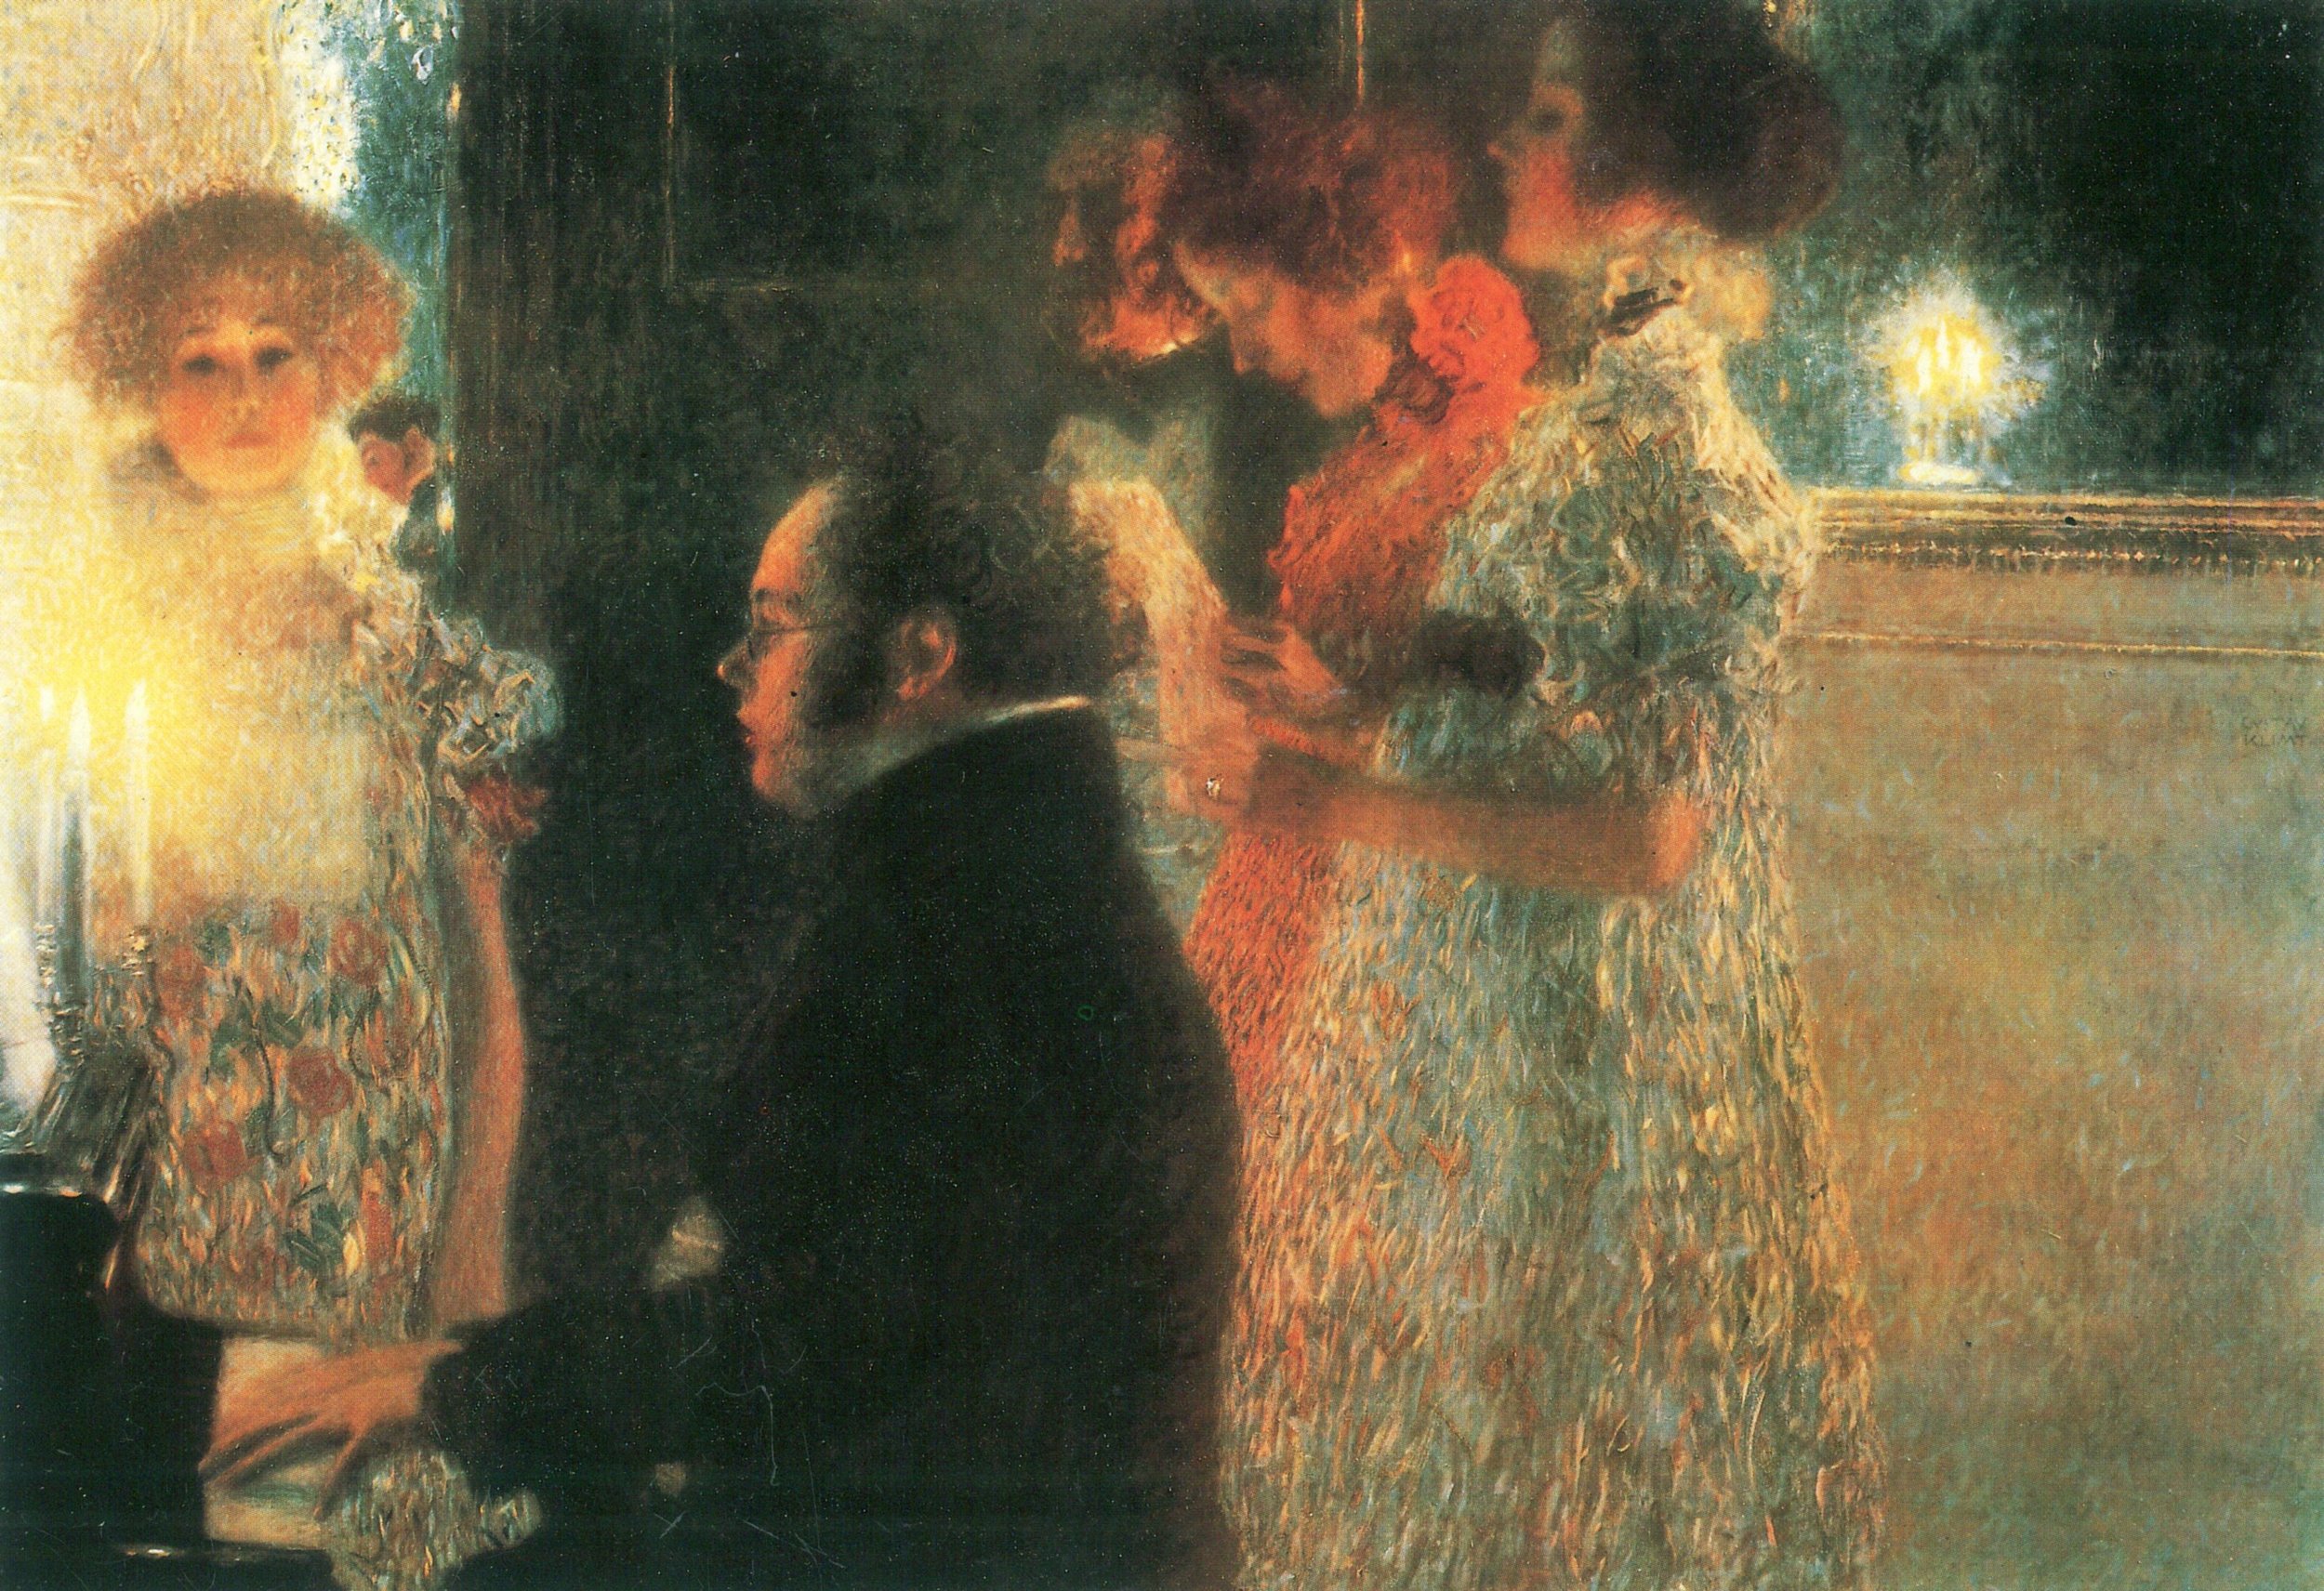 Roland Nivelais: A Sartorial Duet by Raphy Sarkissian | Schubert at the Piano painted by Gustav Klimt. No longer extant.